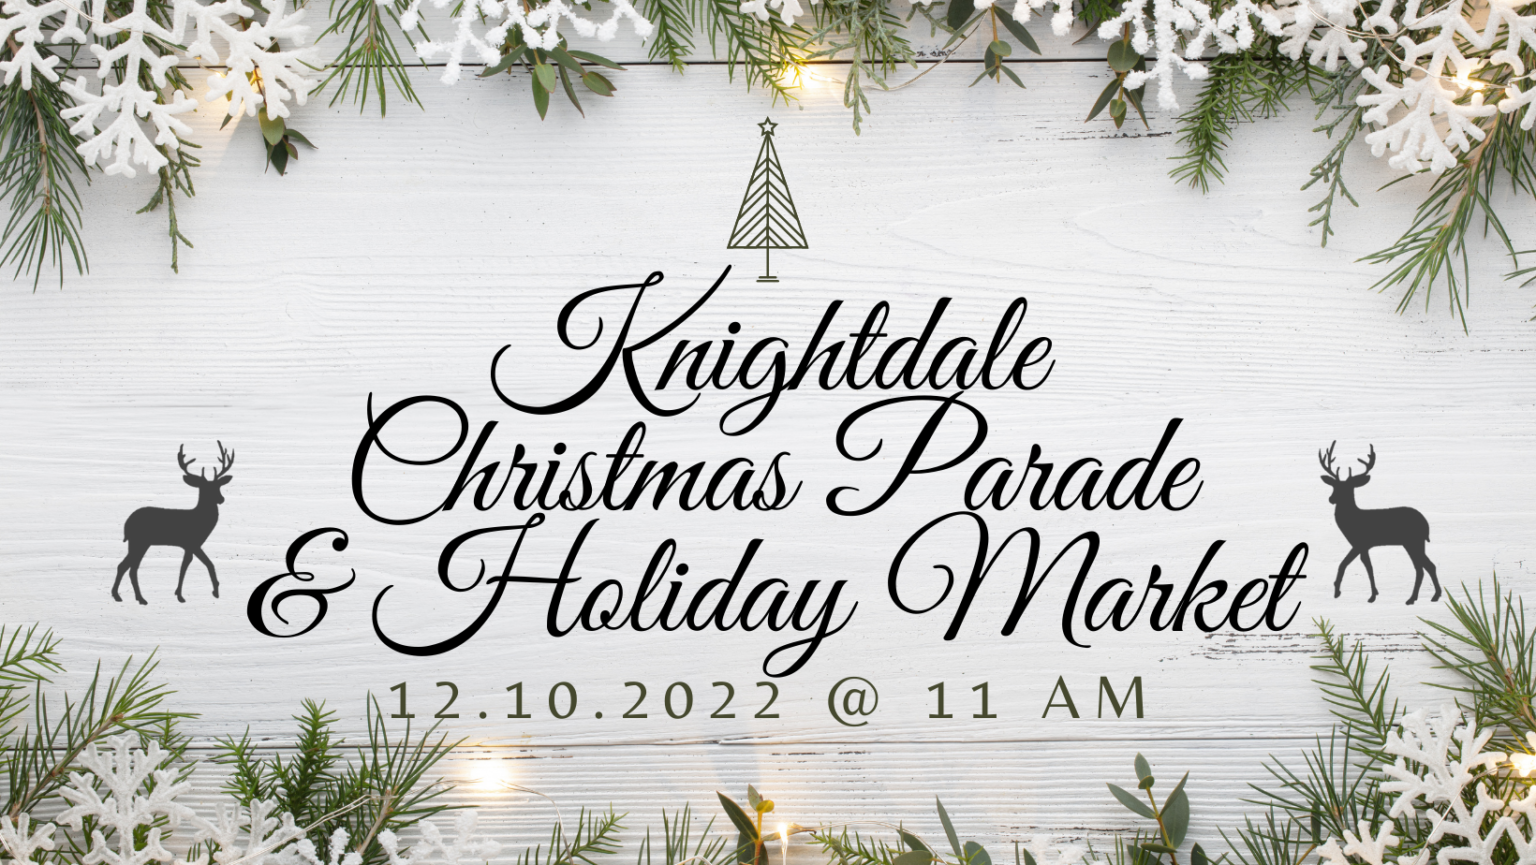 Knightdale Christmas Parade & Holiday Market